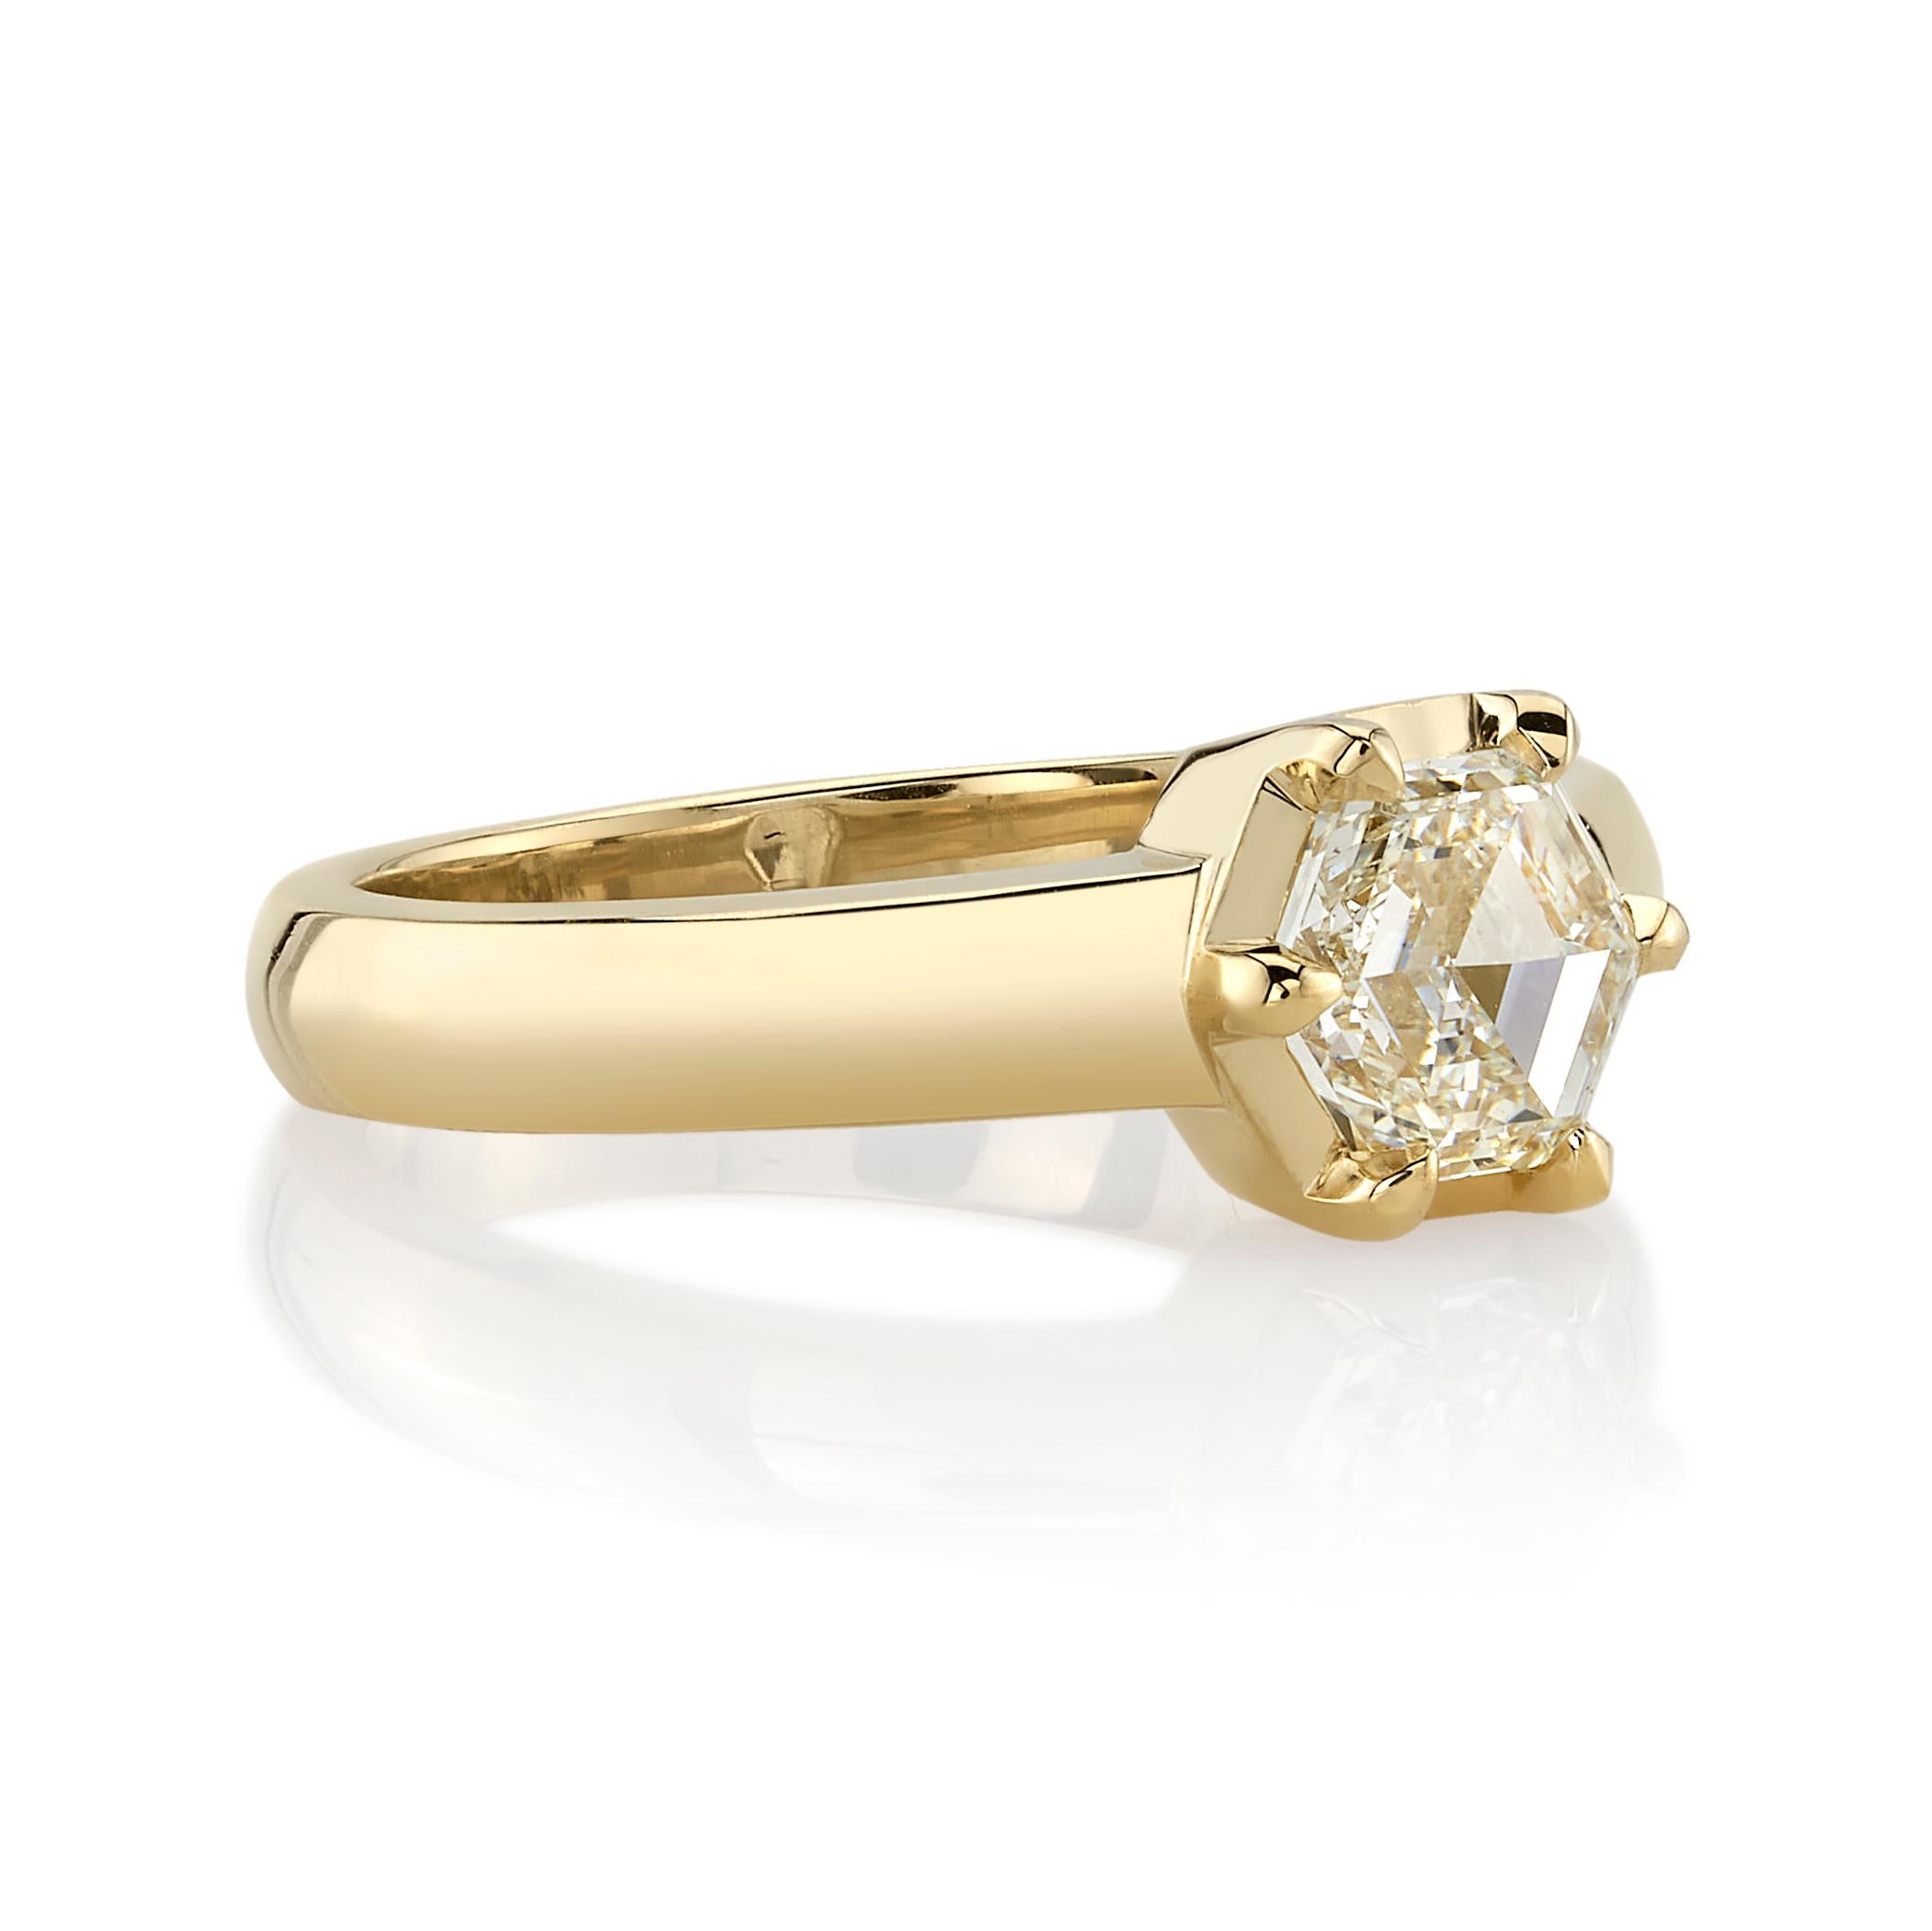 1.01ct K/VS1 GIA certified hexagonal step cut diamond prong set in a handcrafted 18K yellow gold mounting.